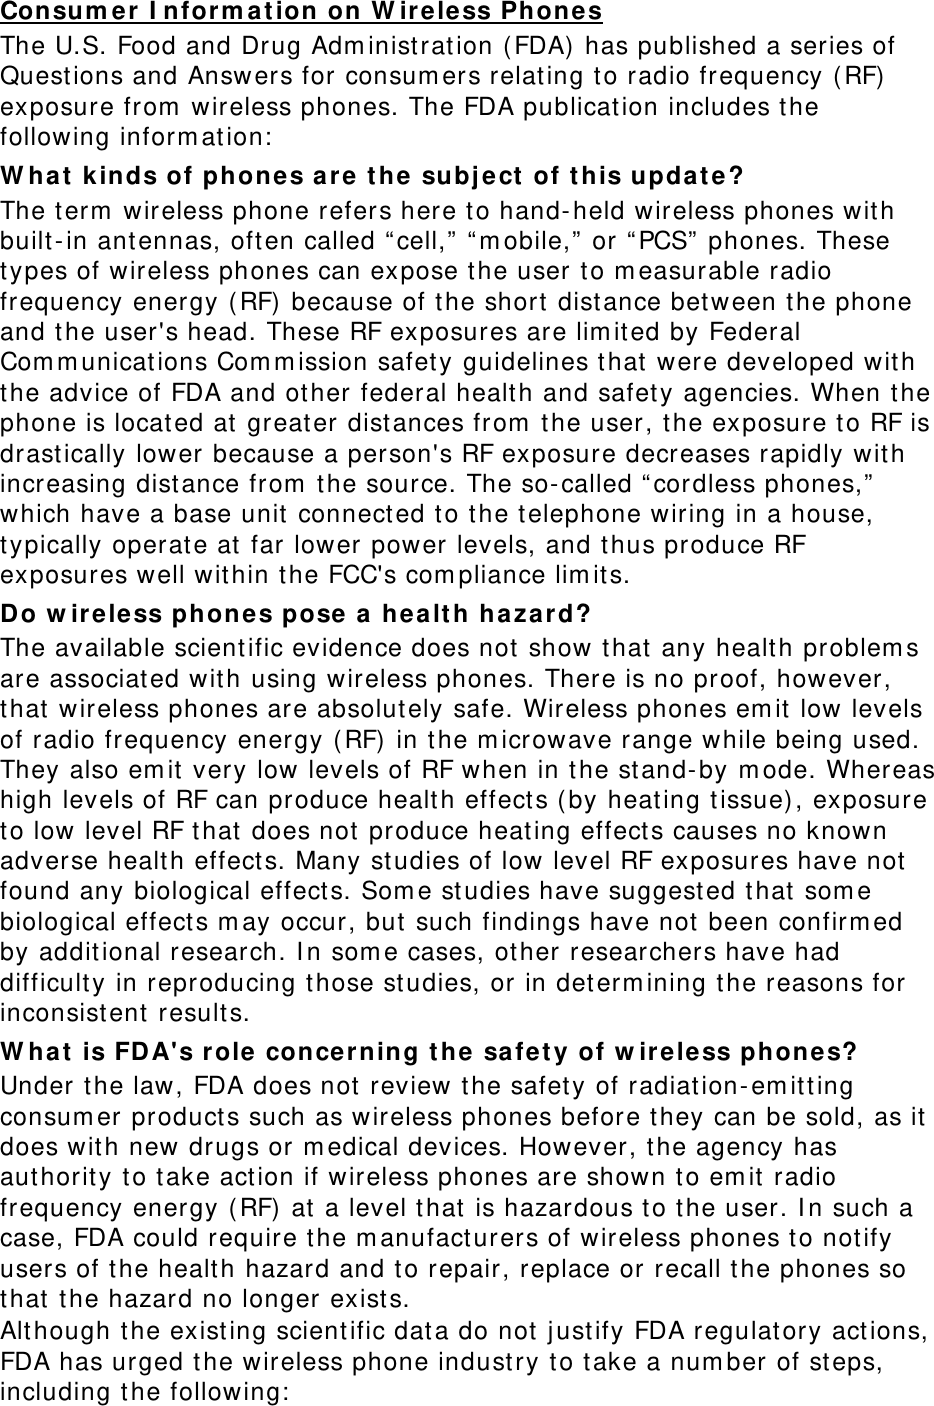 Consu m er I nfor m at ion  on W ireless Phones The U.S. Food and Dr ug Adm inistrat ion ( FDA)  has published a series of Questions and Answ ers for consum ers relating to radio frequency ( RF)  exposure from  wireless phones. The FDA publicat ion includes t he following inform at ion:  W ha t  k inds of ph ones a re t h e  subj ect  of t his upda t e ? The term  wireless phone refers here to hand-held w ireless phones with built-in antennas, oft en called “ cell,”  “ m obile,”  or “ PCS”  phones. These types of wireless phones can expose t he user to m easurable radio frequency energy ( RF)  because of t he short  dist ance bet ween t he phone and t he user&apos;s head. These RF exposures are lim it ed by Federal Com m unications Com m ission safet y guidelines t hat  were developed wit h the advice of FDA and ot her federal health and safety agencies. When t he phone is locat ed at  great er dist ances fr om  the user, t he exposure t o RF is drastically lower because a person&apos;s RF exposure decreases rapidly with increasing dist ance from  t he source. The so-called “ cordless phones,”  which have a base unit  connect ed to the telephone wiring in a house, typically operat e at far  lower  power levels, and t hus produce RF exposures well within the FCC&apos;s com pliance lim its. Do w ireless phones pose a  he a lt h h a za r d? The available scient ific evidence does not show that any healt h problem s are associat ed w it h using wireless phones. There is no proof, however, that  w ir eless phones are absolut ely safe. Wireless phones em it  low levels of radio frequency energy ( RF)  in t he m icrowave range while being used. They also em it  very low levels of RF when in t he st and-by m ode. Whereas high levels of RF can produce healt h effect s ( by heating t issue), exposure to low level RF t hat does not produce heat ing effect s causes no known adverse health effect s. Many studies of low level RF exposures have not found any biological effect s. Som e st udies have suggested t hat  som e biological effect s m ay occur, but  such findings have not  been confirm ed by addit ional research. I n som e cases, ot her researchers have had difficult y in reproducing t hose st udies, or in det erm ining t he reasons for inconsist ent results. W ha t  is FD A&apos;s role concer ning t he  sa fet y of w ireless phones? Under t he law, FDA does not review t he safety of radiat ion-em it t ing consum er product s such as w ireless phones before they can be sold, as it does wit h new drugs or m edical devices. However, t he agency has aut hority t o t ake act ion if wireless phones are shown to em it radio frequency energy ( RF)  at a level t hat is hazardous t o t he user. I n such a case, FDA could require t he m anufact urers of wireless phones t o notify users of the healt h hazard and to repair, replace or recall t he phones so that  the hazard no longer exist s. Alt hough t he exist ing scient ific dat a do not j ust ify FDA regulat ory act ions, FDA has urged t he wireless phone industry t o t ake a num ber of st eps, including t he following:  